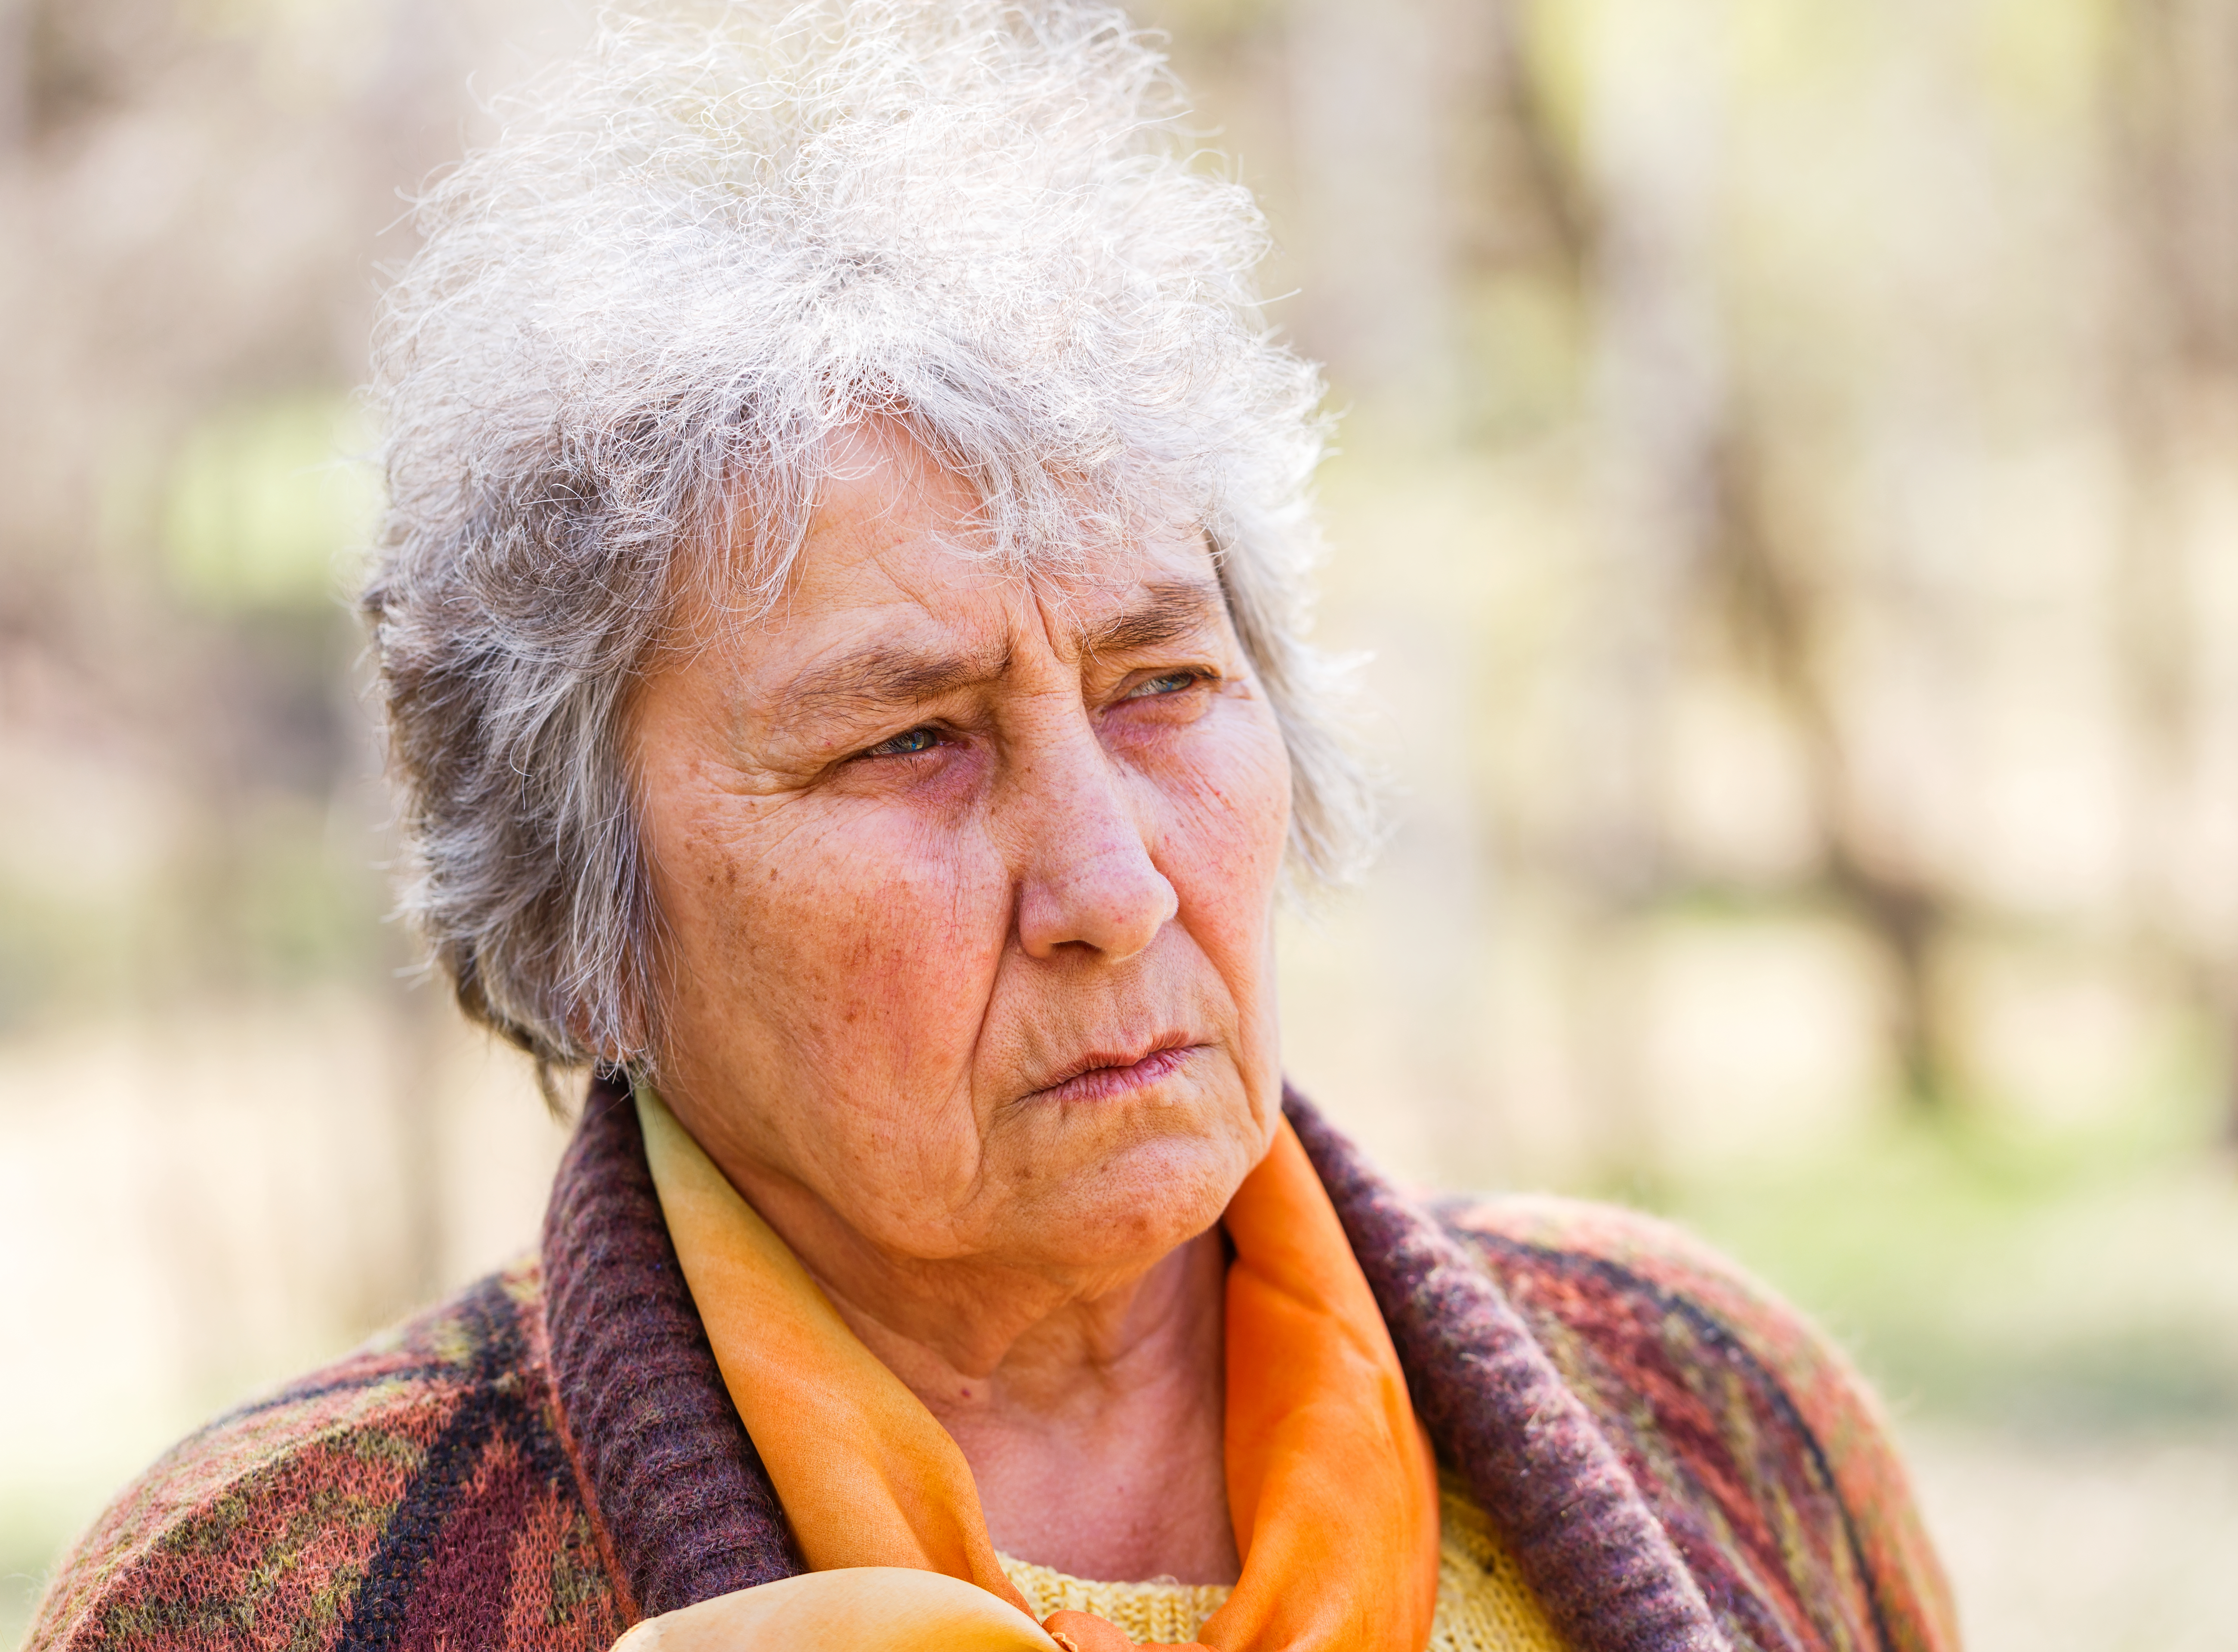 An angry-looking older woman | Source: Shutterstock